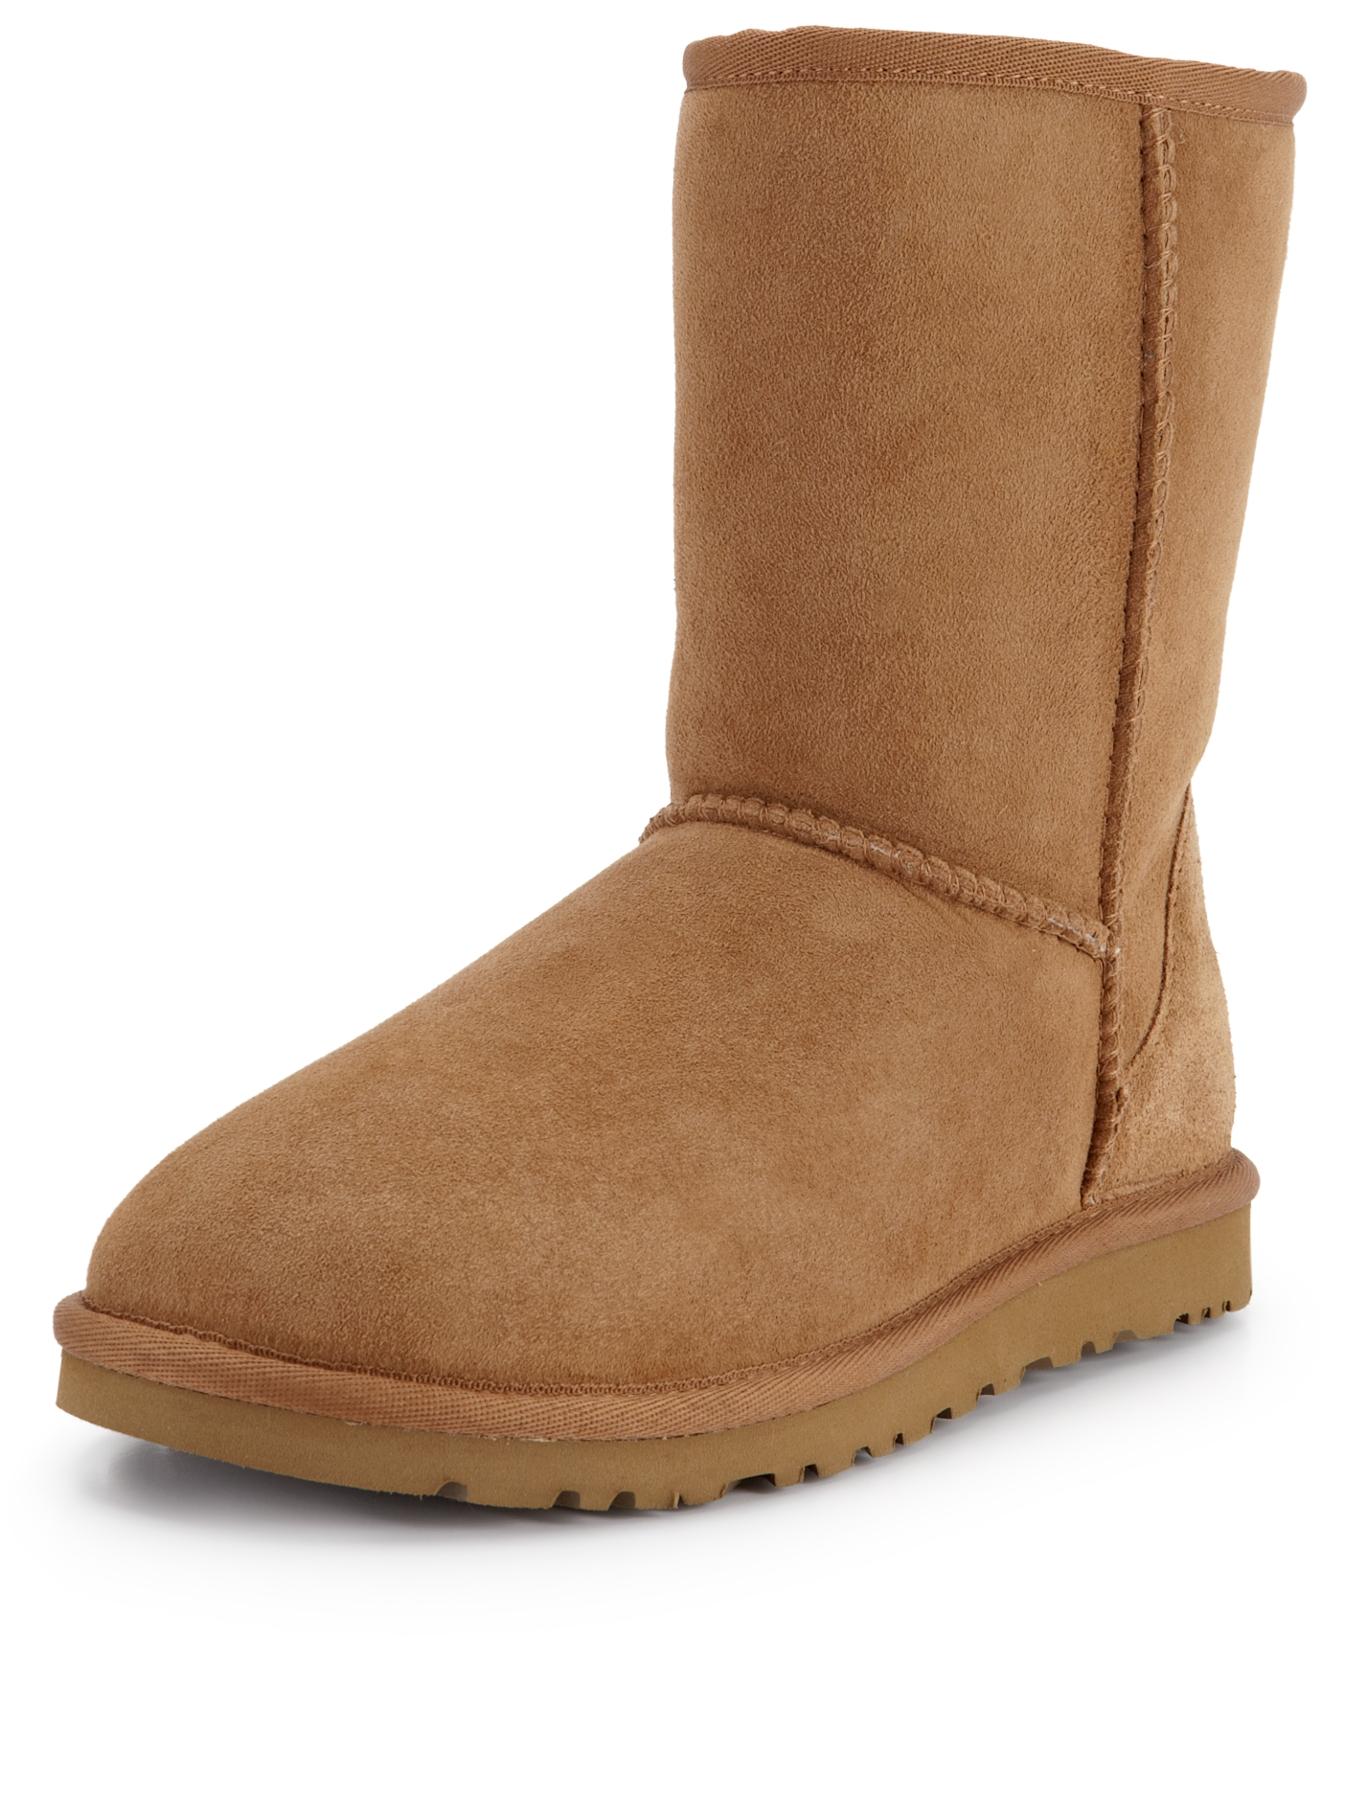 winter boots uggs cheap